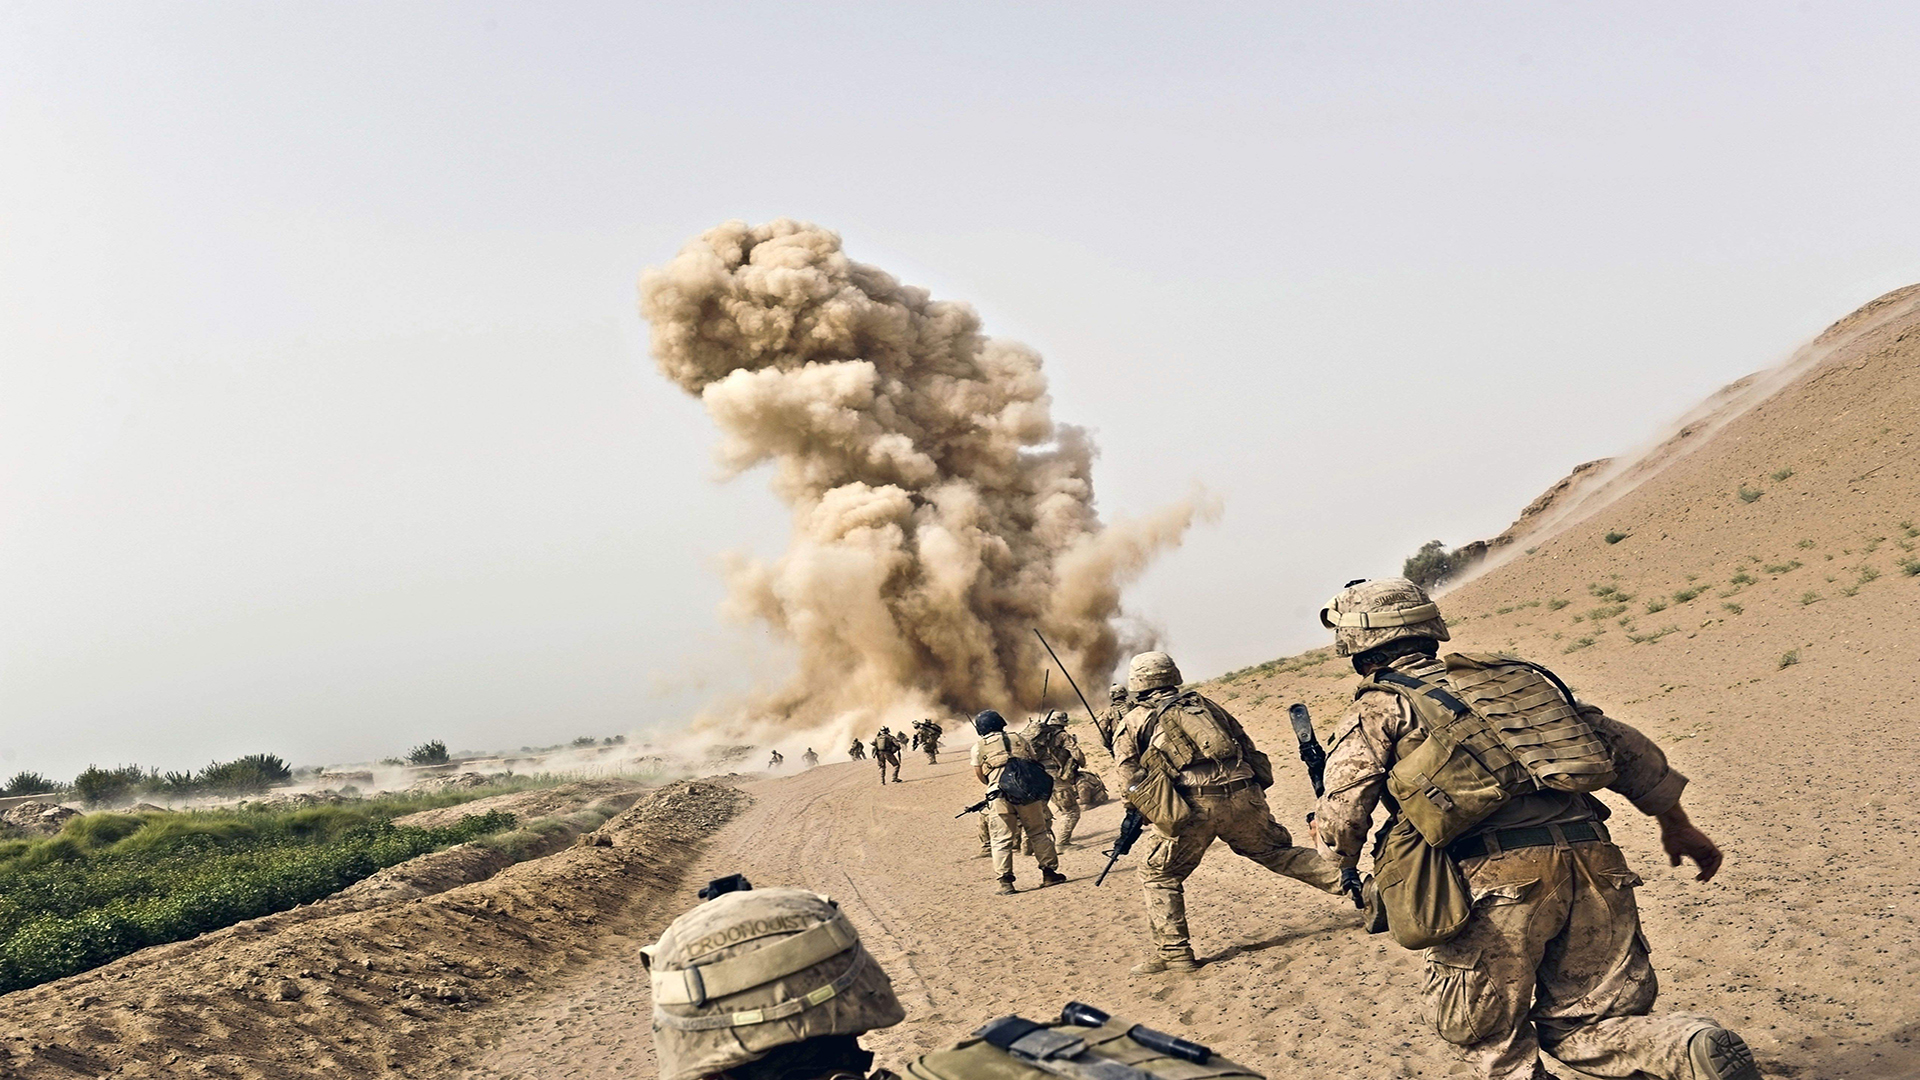 People 1920x1080 War in Afghanistan United States Marine Corps military explosion infantry